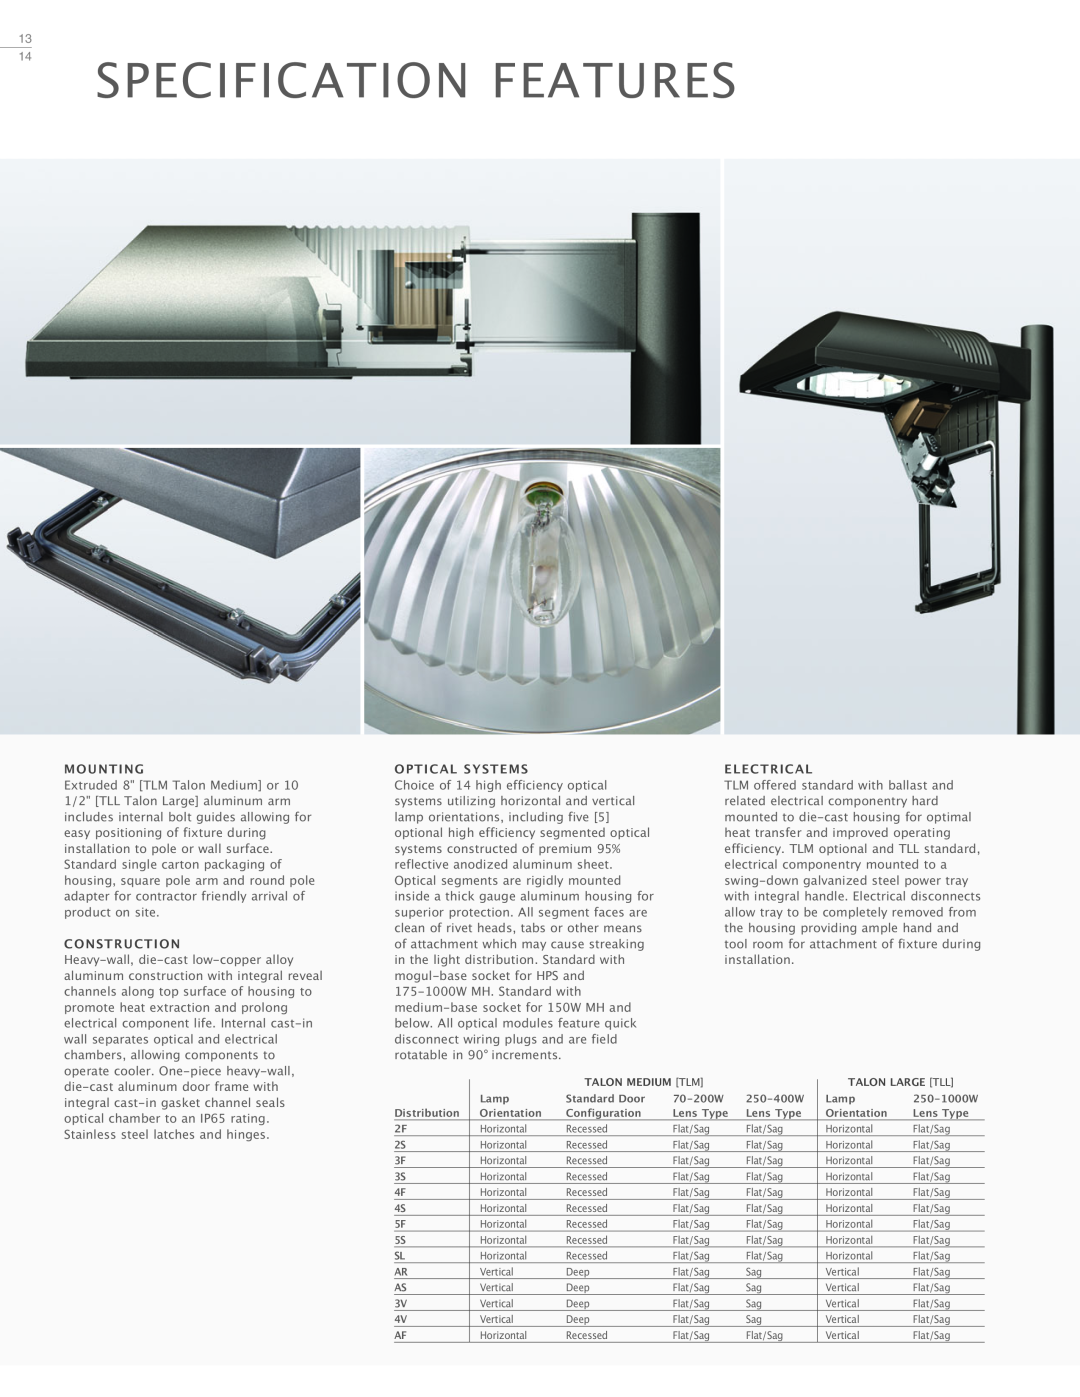 Cooper Lighting Architectural Area Luminaire Specification Features, Mounting, Construction, Optical Systems, Electrical 